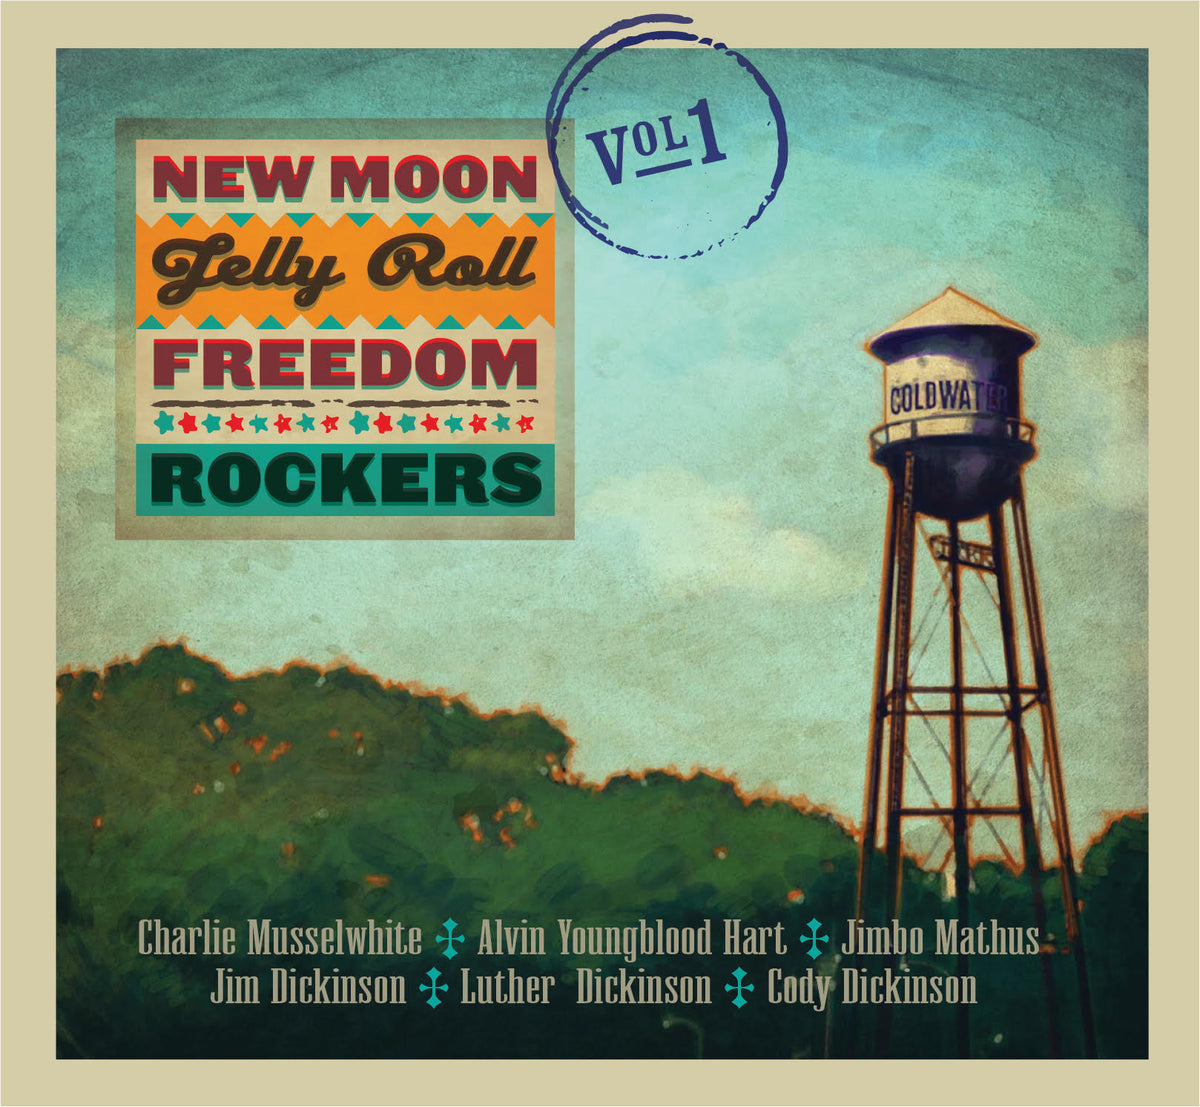 New Moon Jelly Roll Freedom Rockers: Volume 1